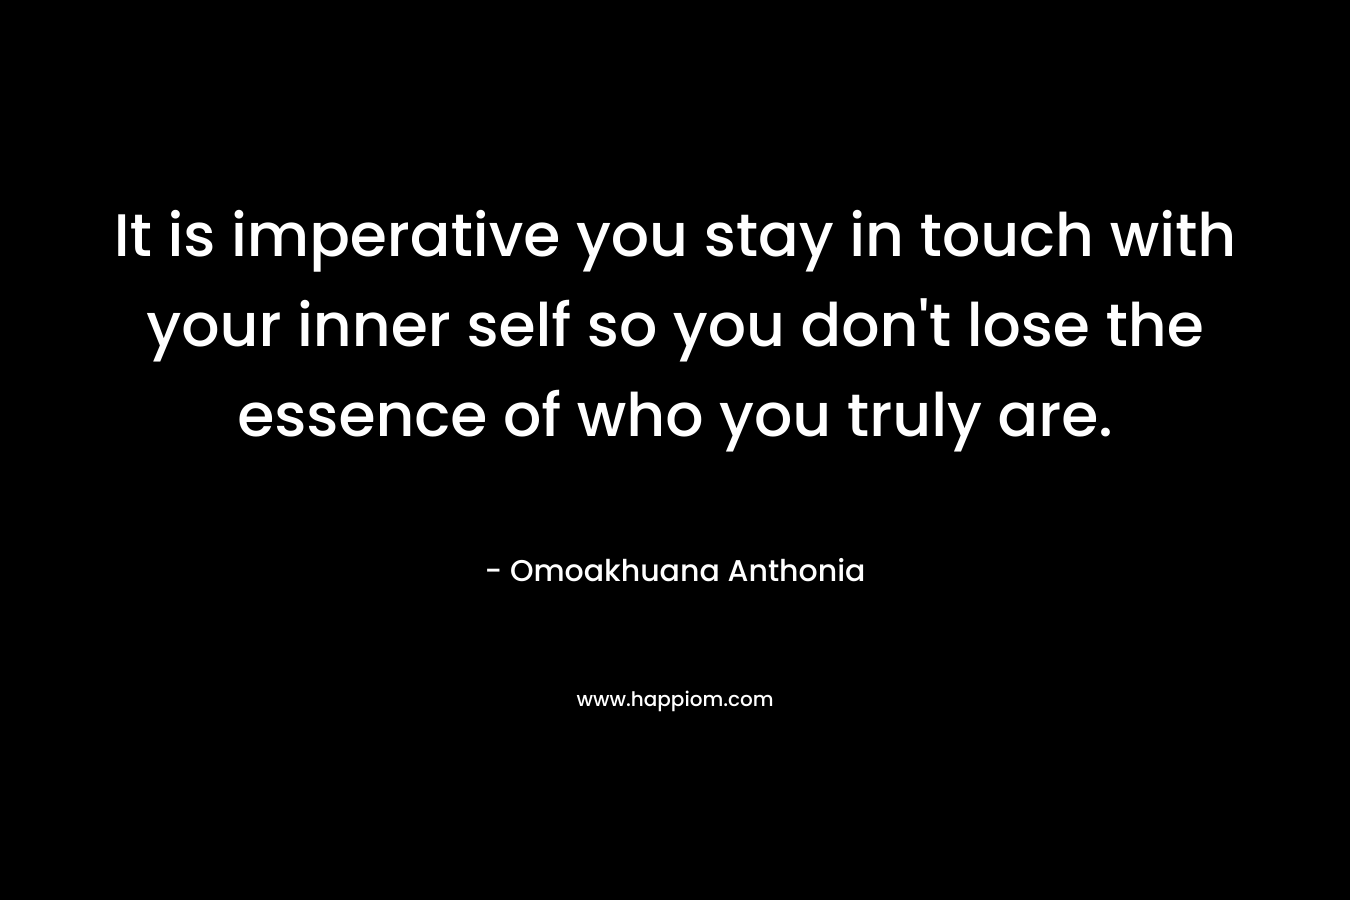 It is imperative you stay in touch with your inner self so you don’t lose the essence of who you truly are. – Omoakhuana Anthonia